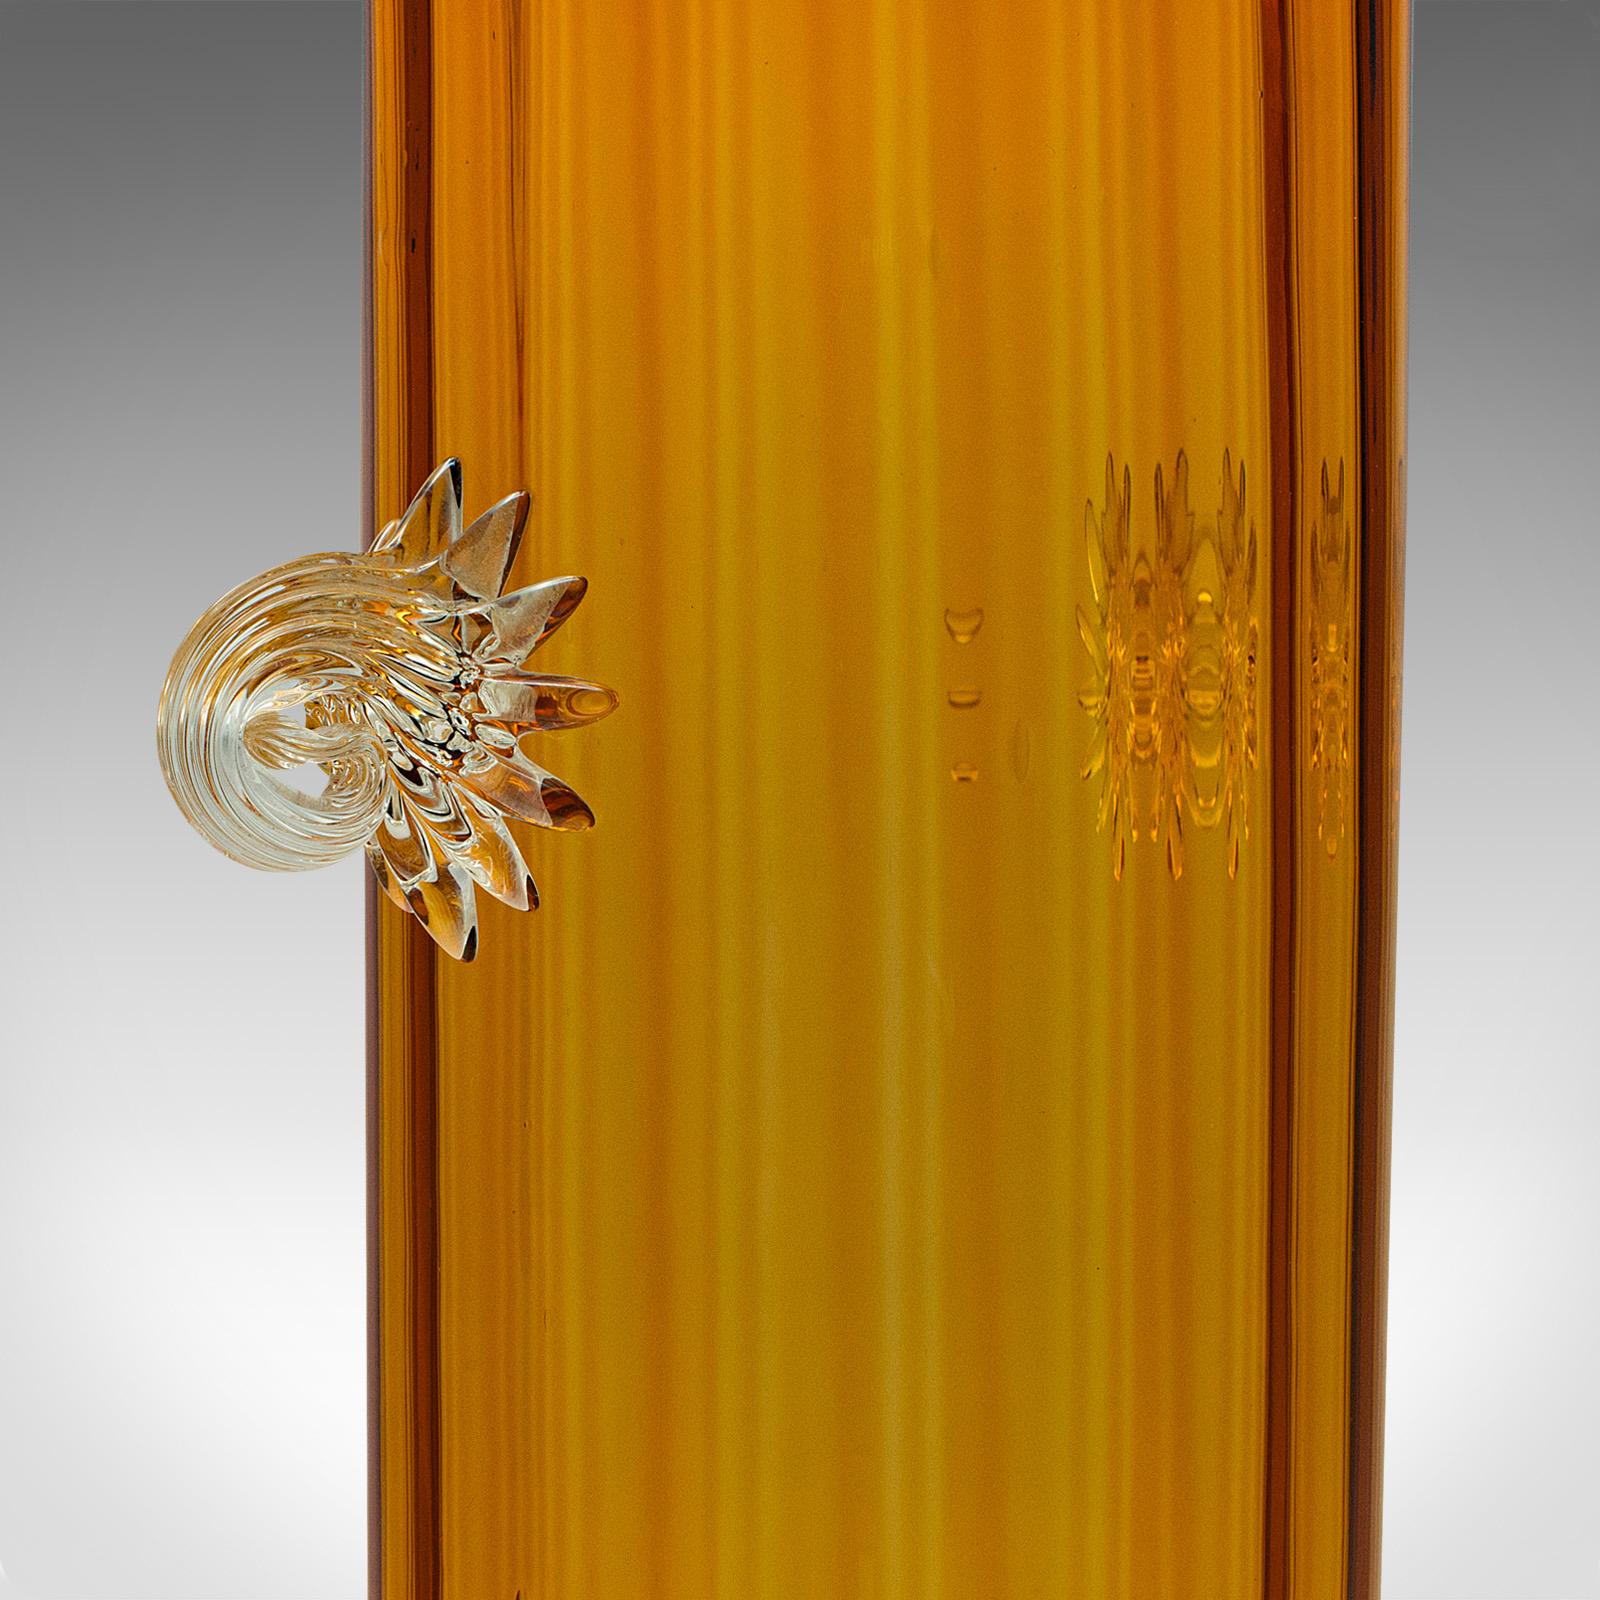 Tall Vintage Ribbed Vase, French, Art Glass, Flower Sleeve, Art Deco, Circa 1930 For Sale 4